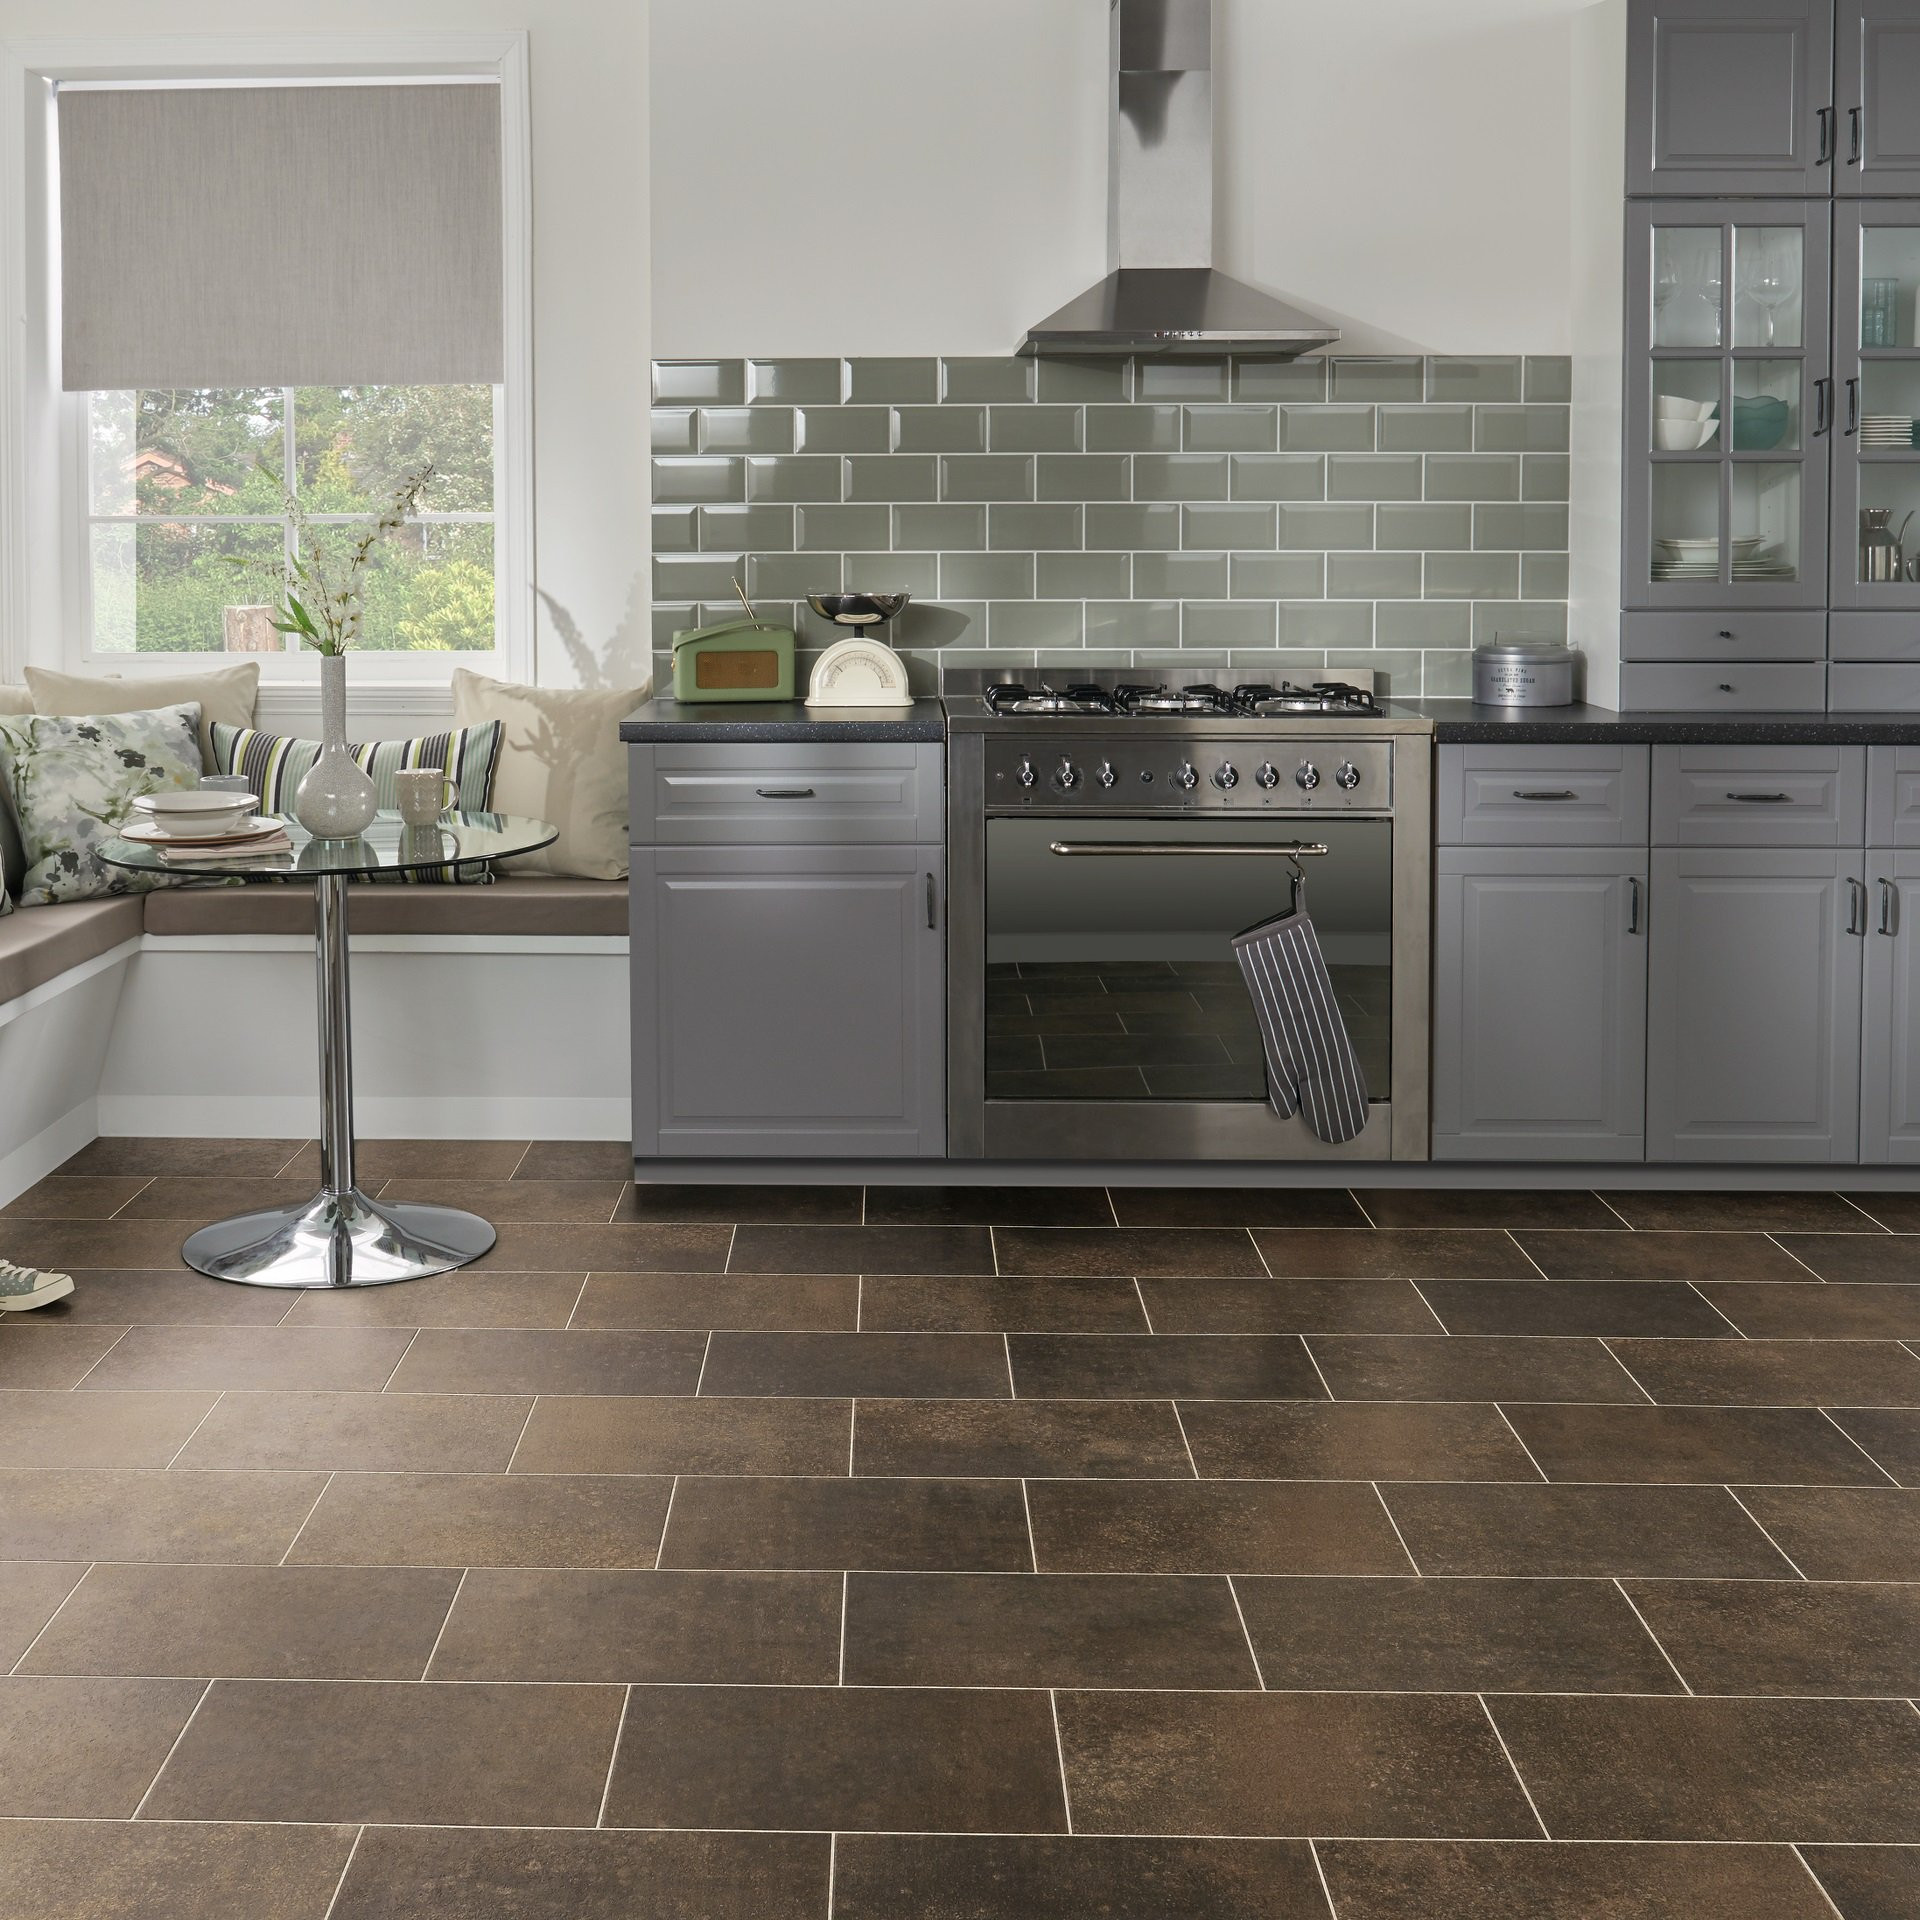 Kitchen Tile Floor Ideas
 Kitchen Flooring Tiles and Ideas for Your Home